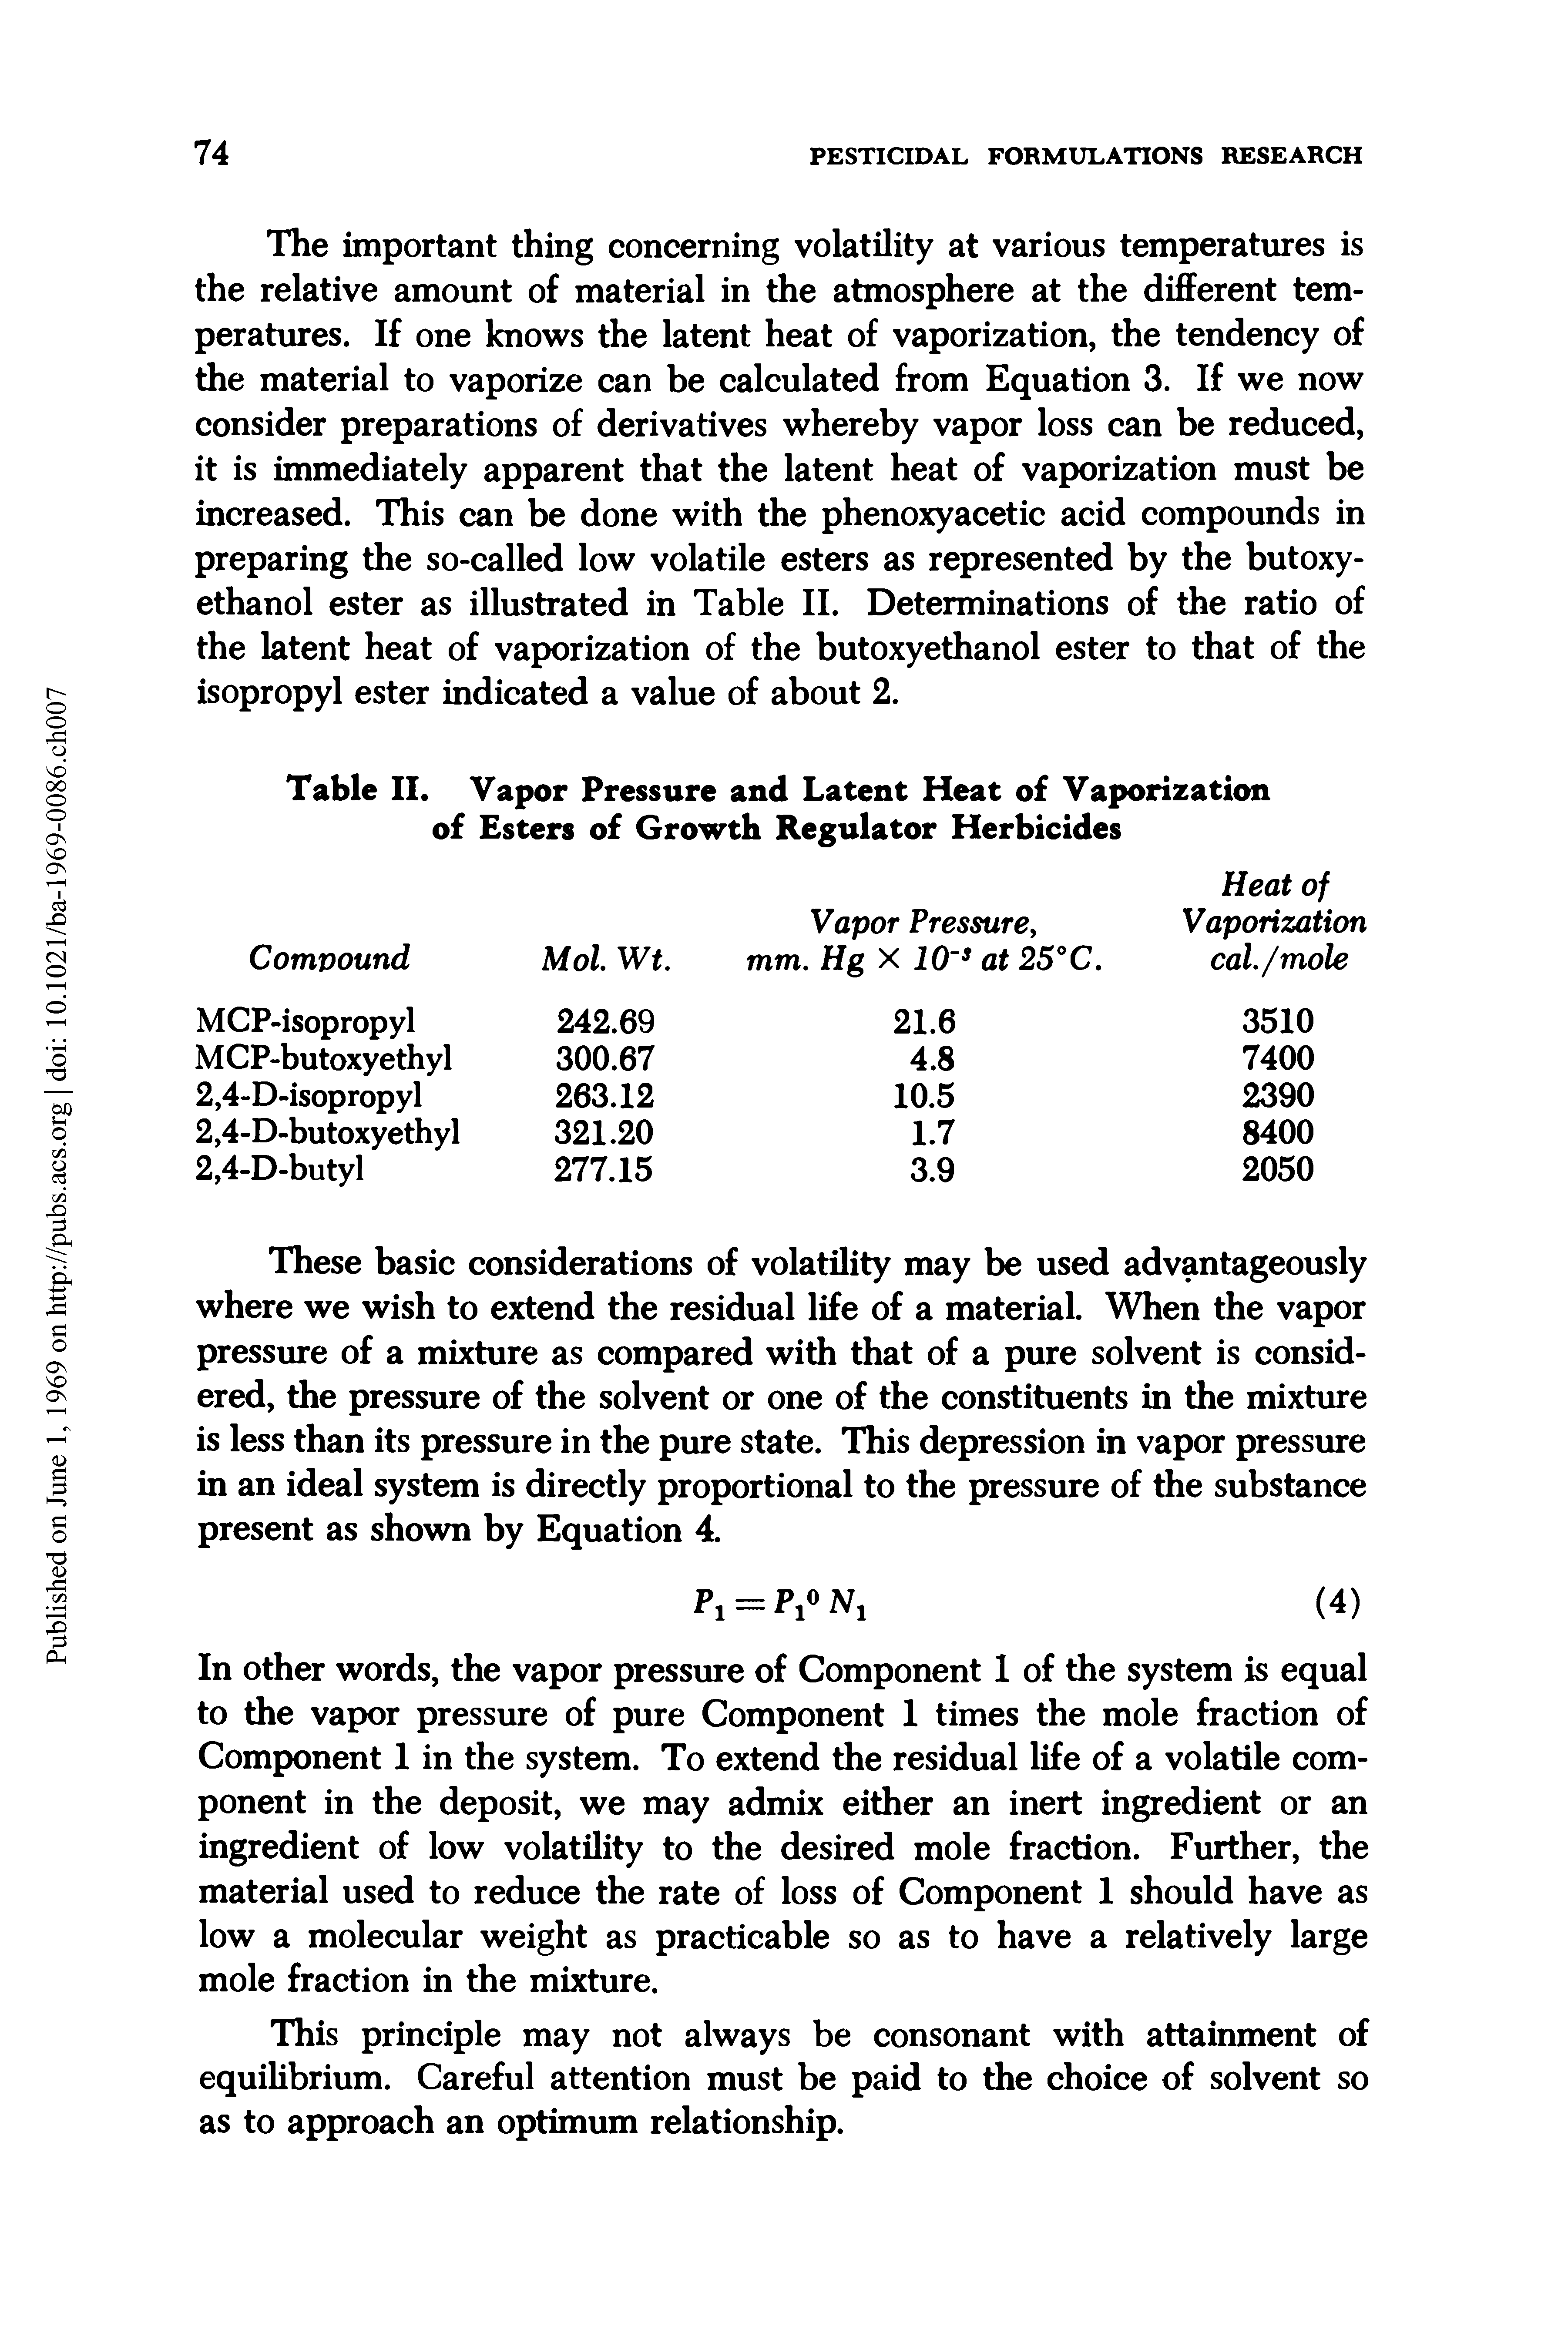 Table II. Vapor Pressure and Latent Heat of Vaporization of Esters of Growth Regulator Herbicides...